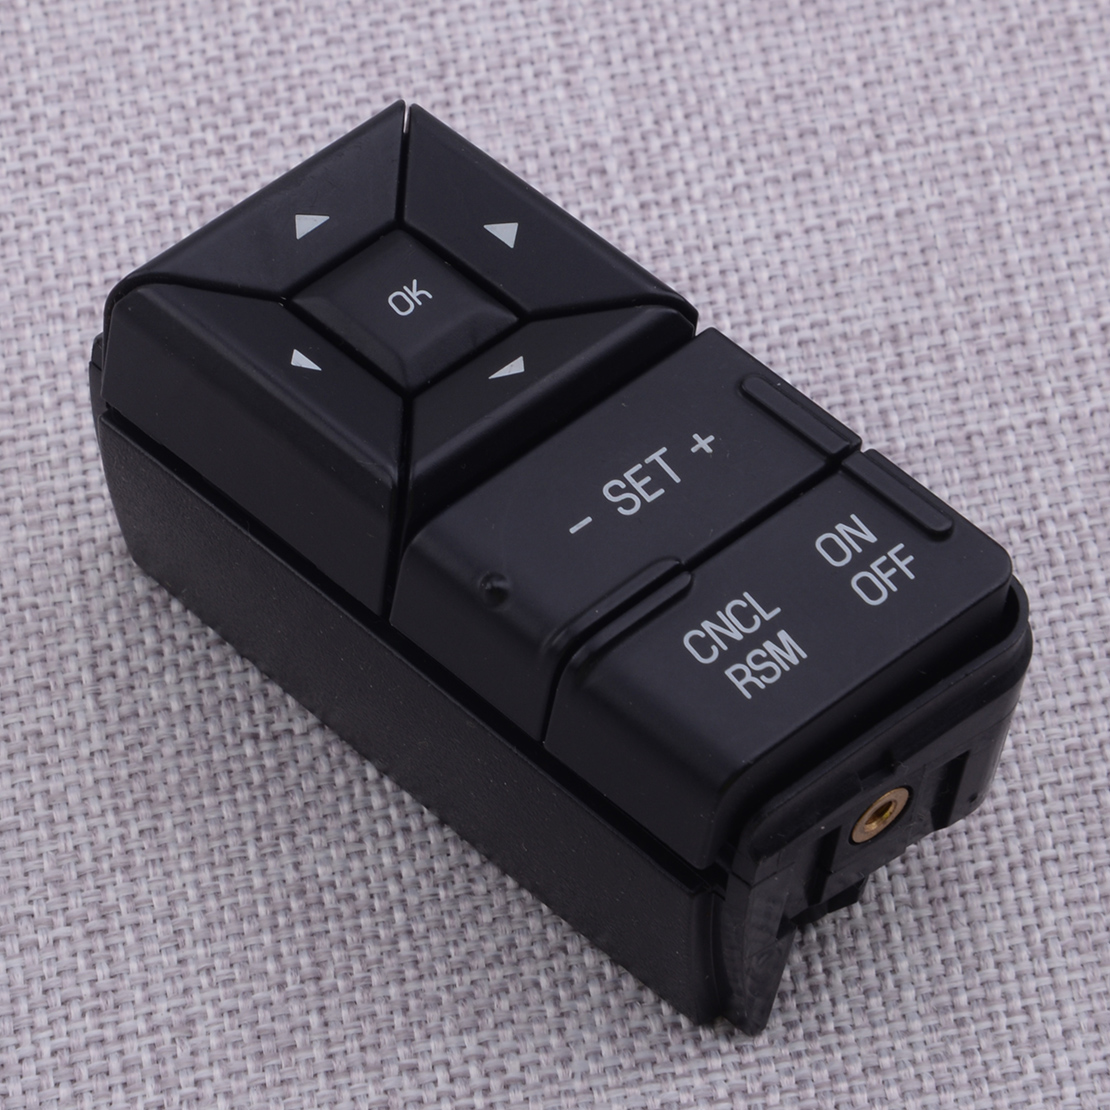 Bl3t 9e740 Acw Steering Wheel Cruise Control Switch Fit For Ford F 150